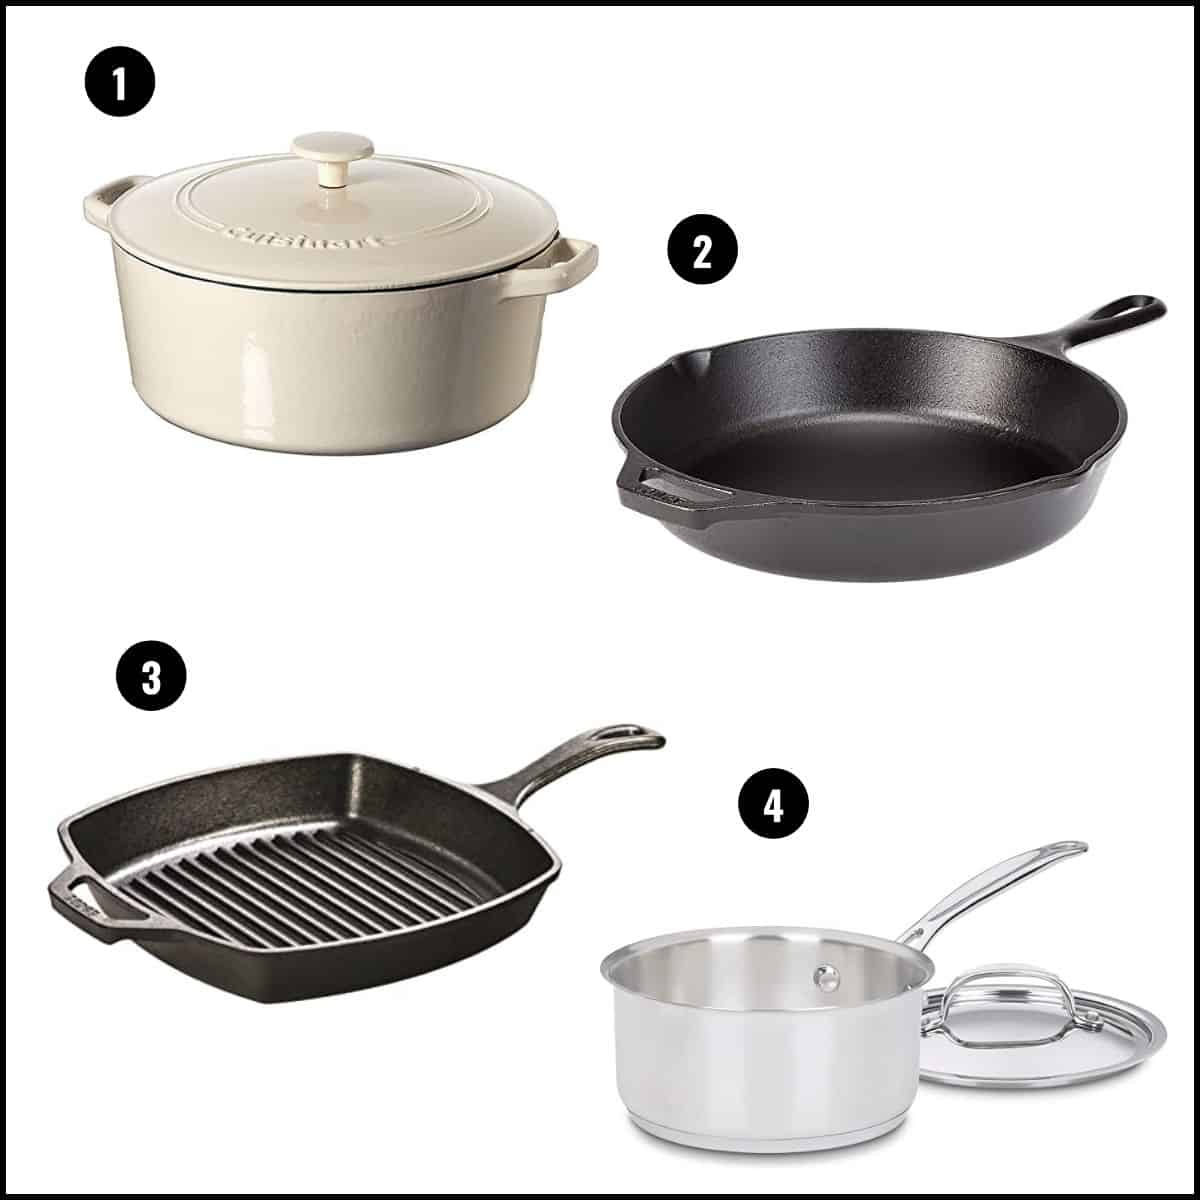 Graphic showing cookware with associated numbers.